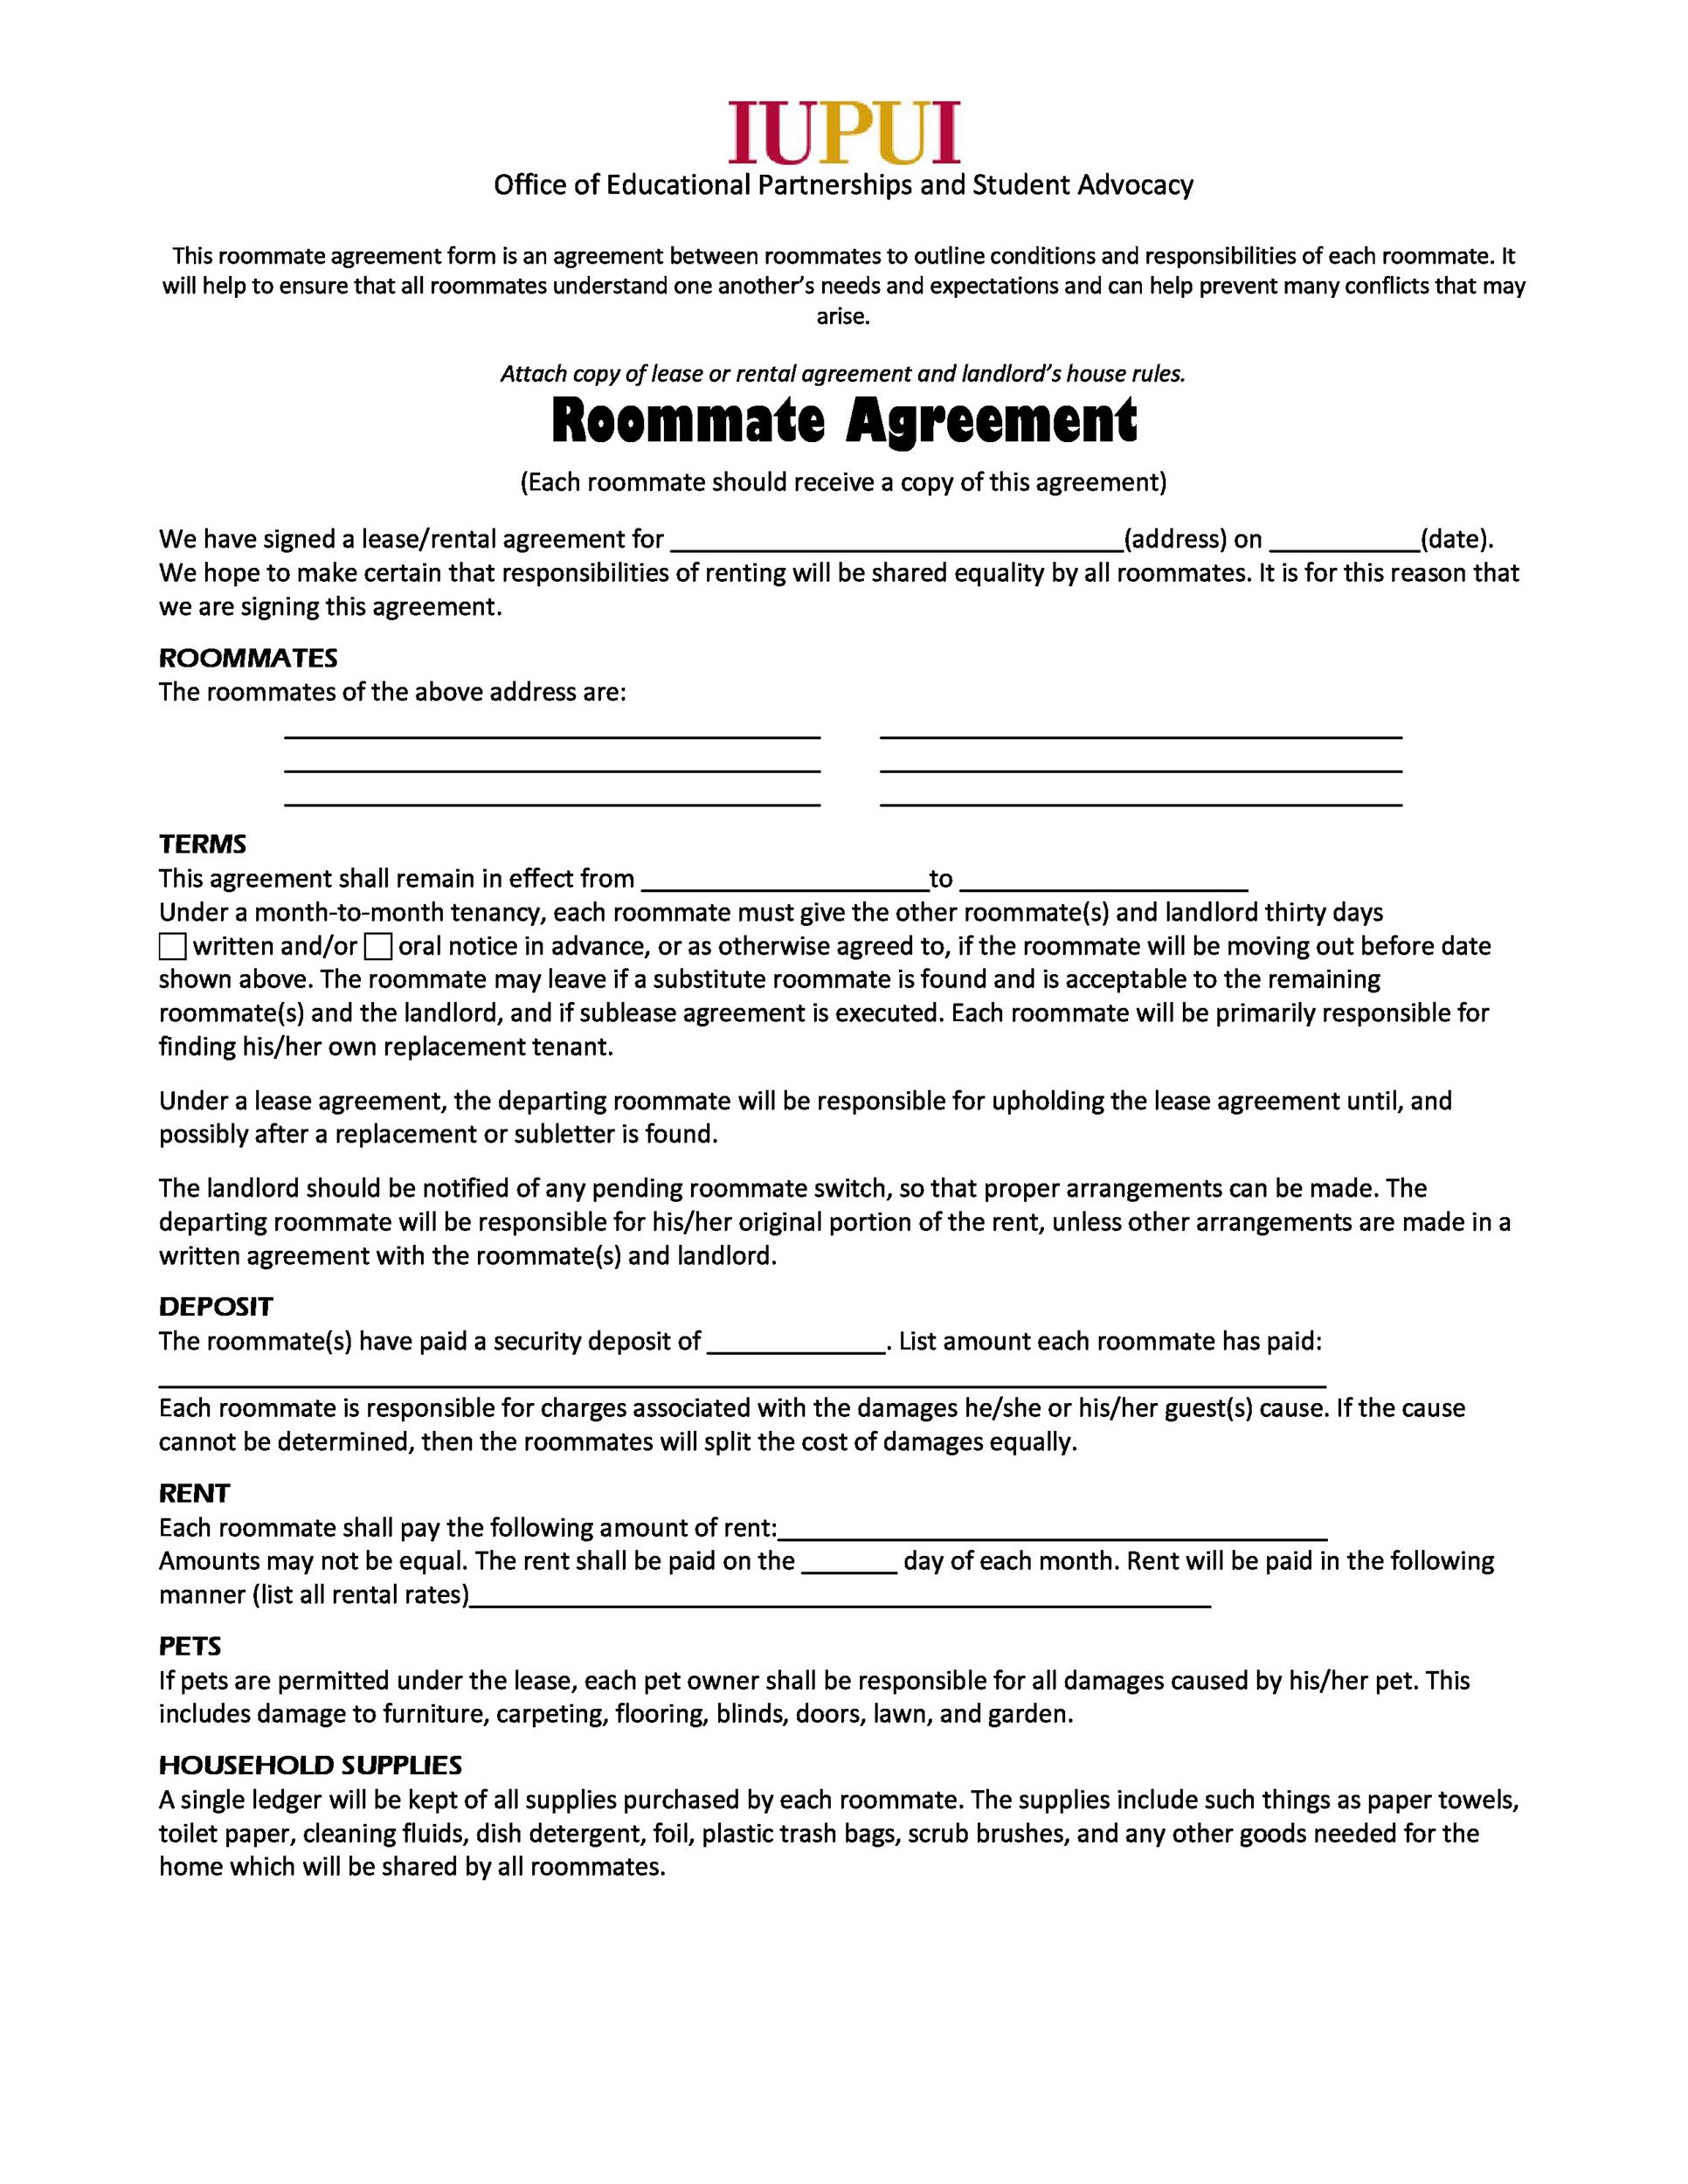 10+ Free Roommate Agreement Templates & Forms (Word, PDF) Inside Security Deposit Agreement Between Roommates With Regard To Security Deposit Agreement Between Roommates